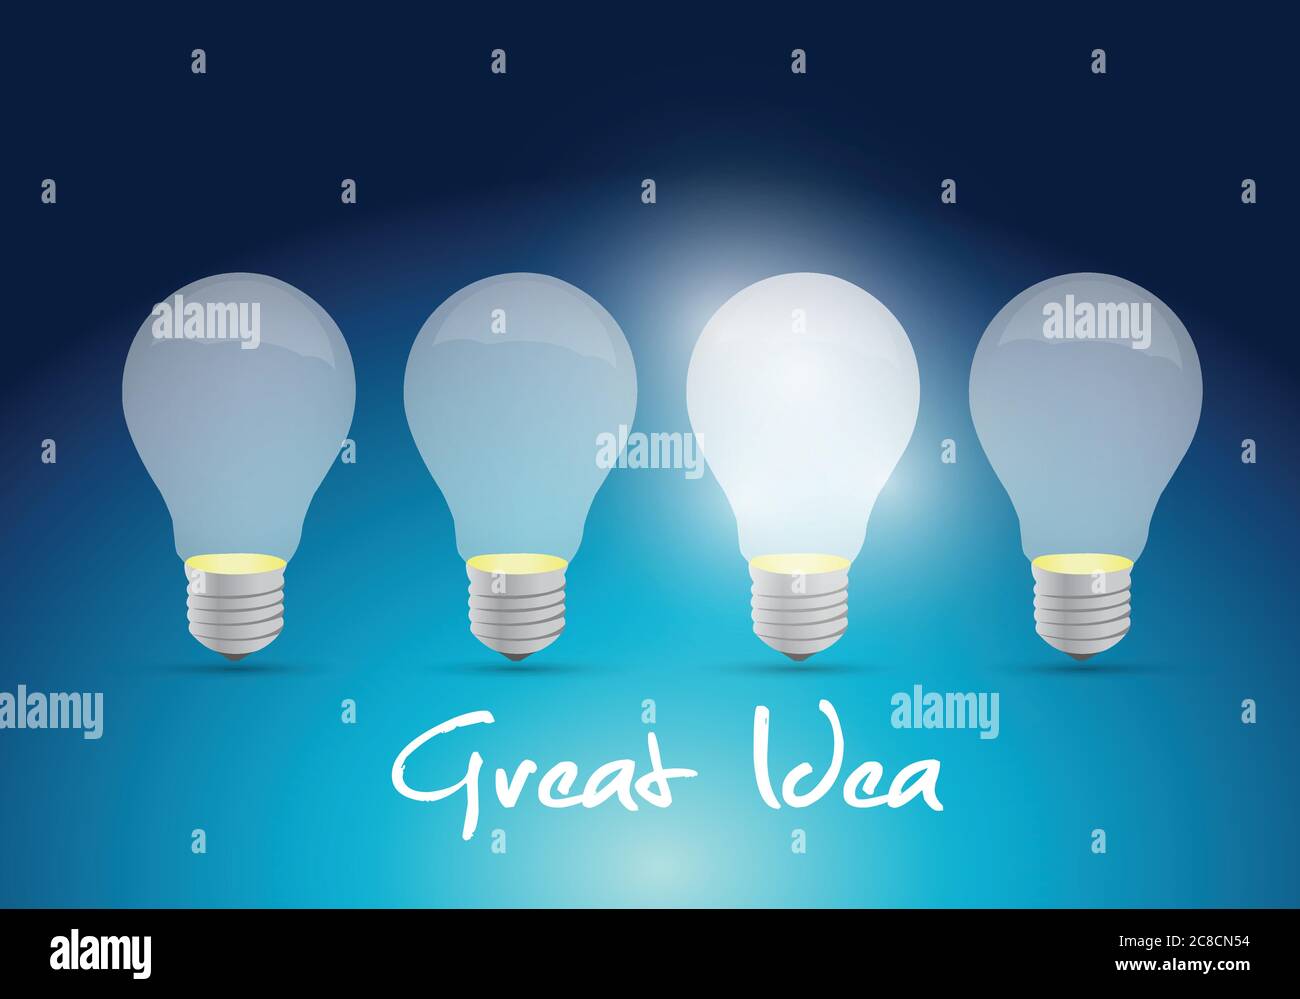 Bright great ideas illustration design over a blue background Stock Vector